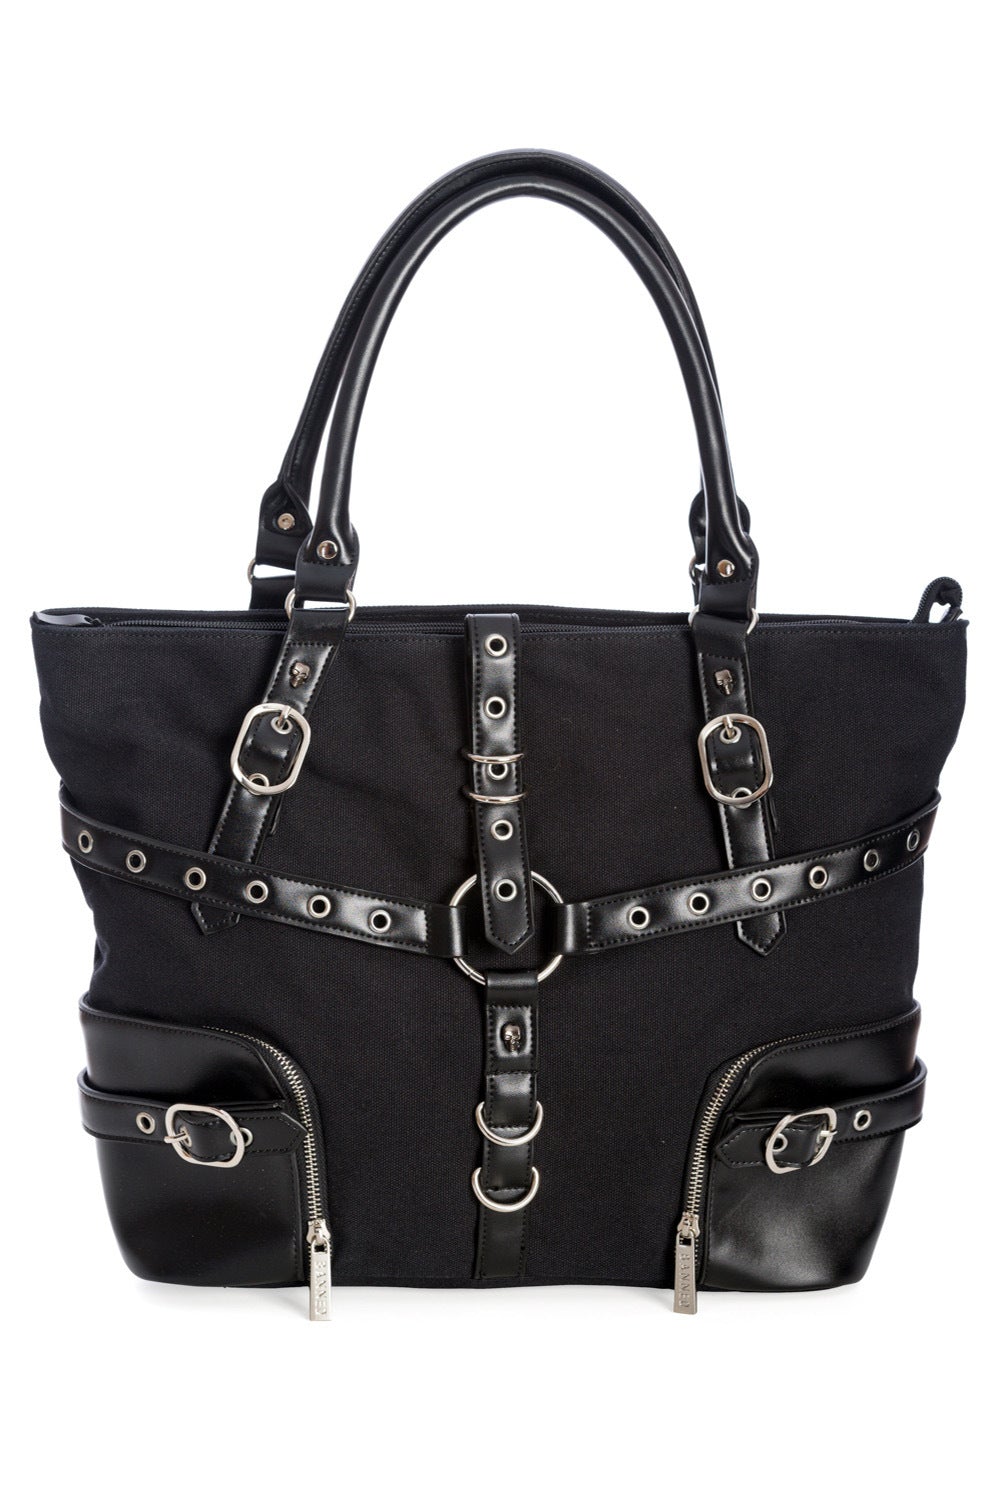 Black tote back with faux leather strap details